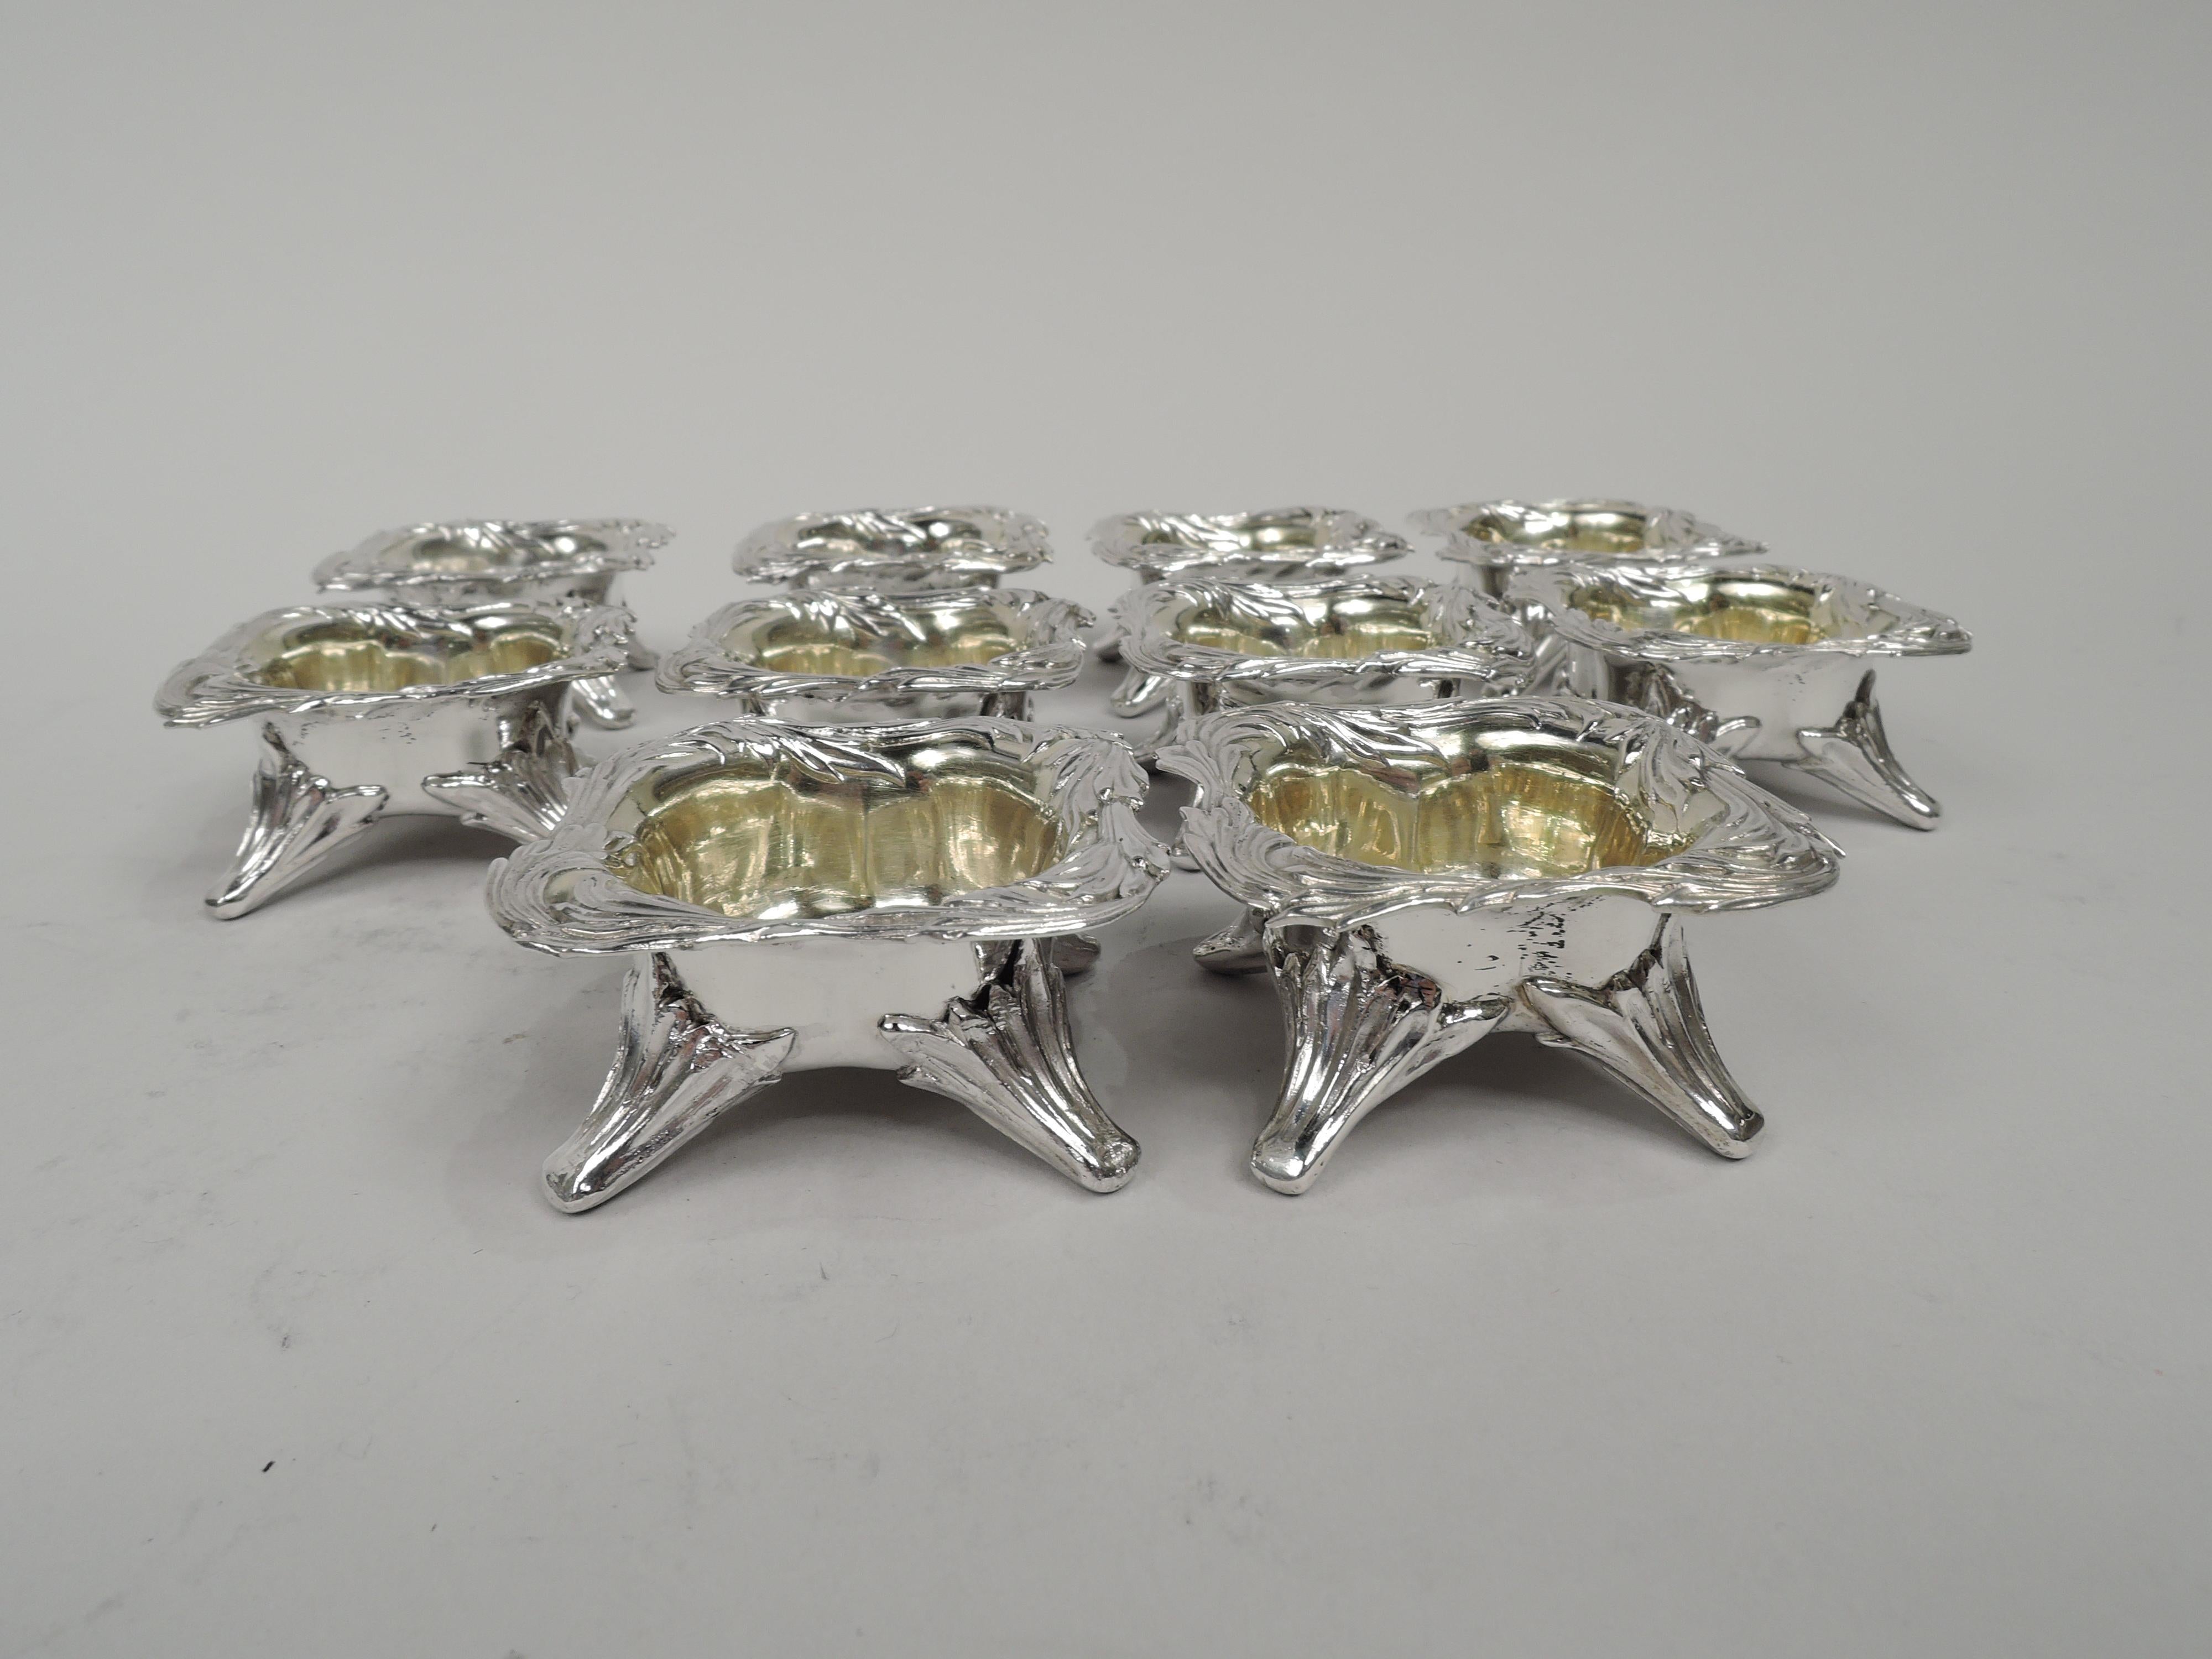 Set of 10 Chrysanthemum sterling silver open salts. Made by Tiffany & Co. in New York. Each: Lobed and gilt washed bowl in square frame with irregular shaggy leaf rim. Splayed corner leaf supports. Gorgeous pieces in modish late 19th-century